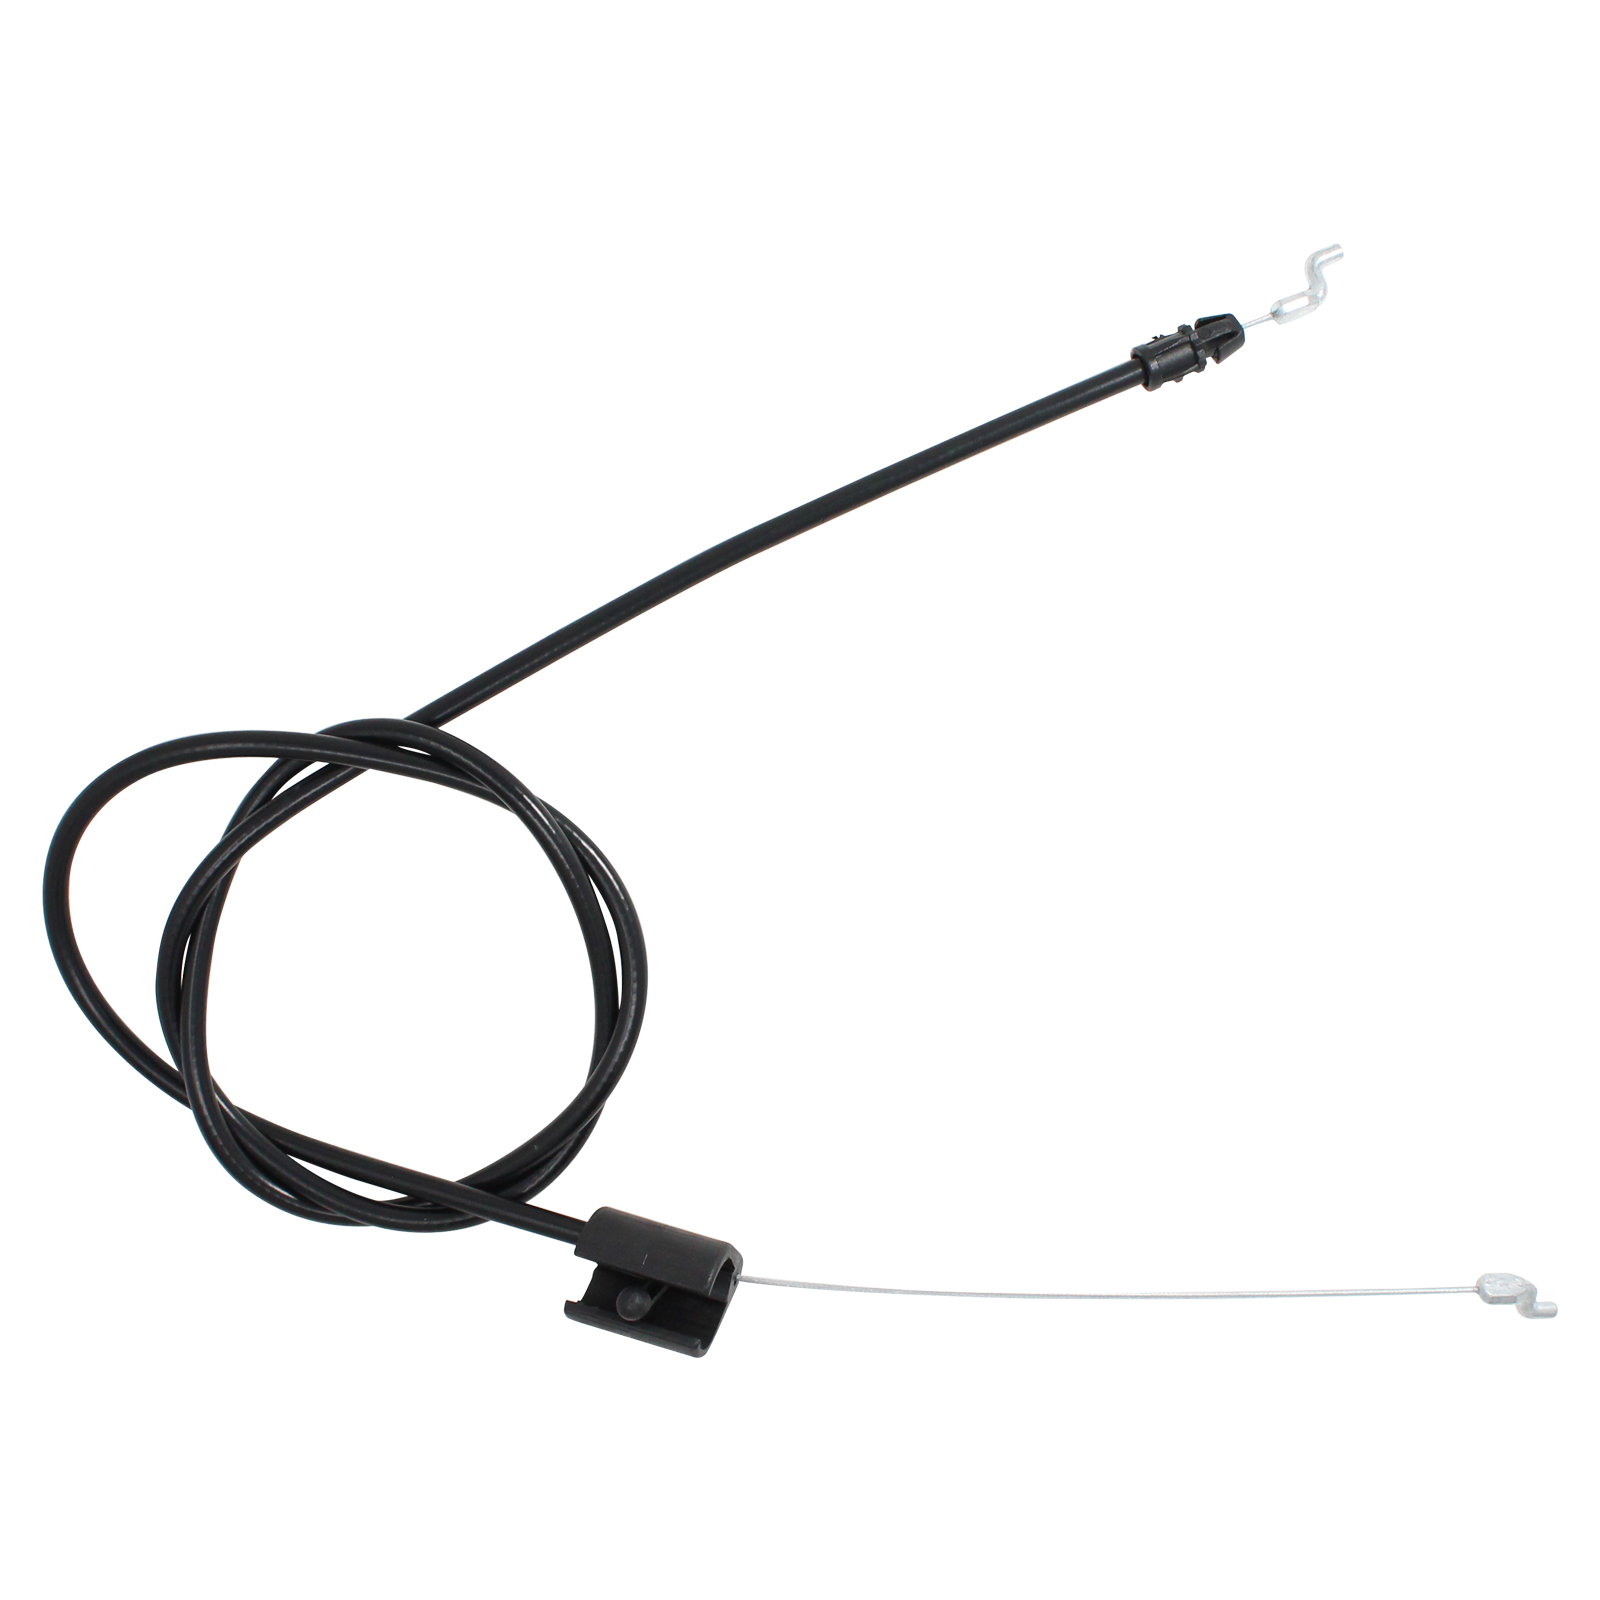 532176556 Engine Cable Replacement for Husqvarna ROTARY LAWN MOWER (96114000701) (2007-01) Lawn Mower: Consumer Walk Behind - Compatible with 176556 162778 Zone Control Cable - image 4 of 4